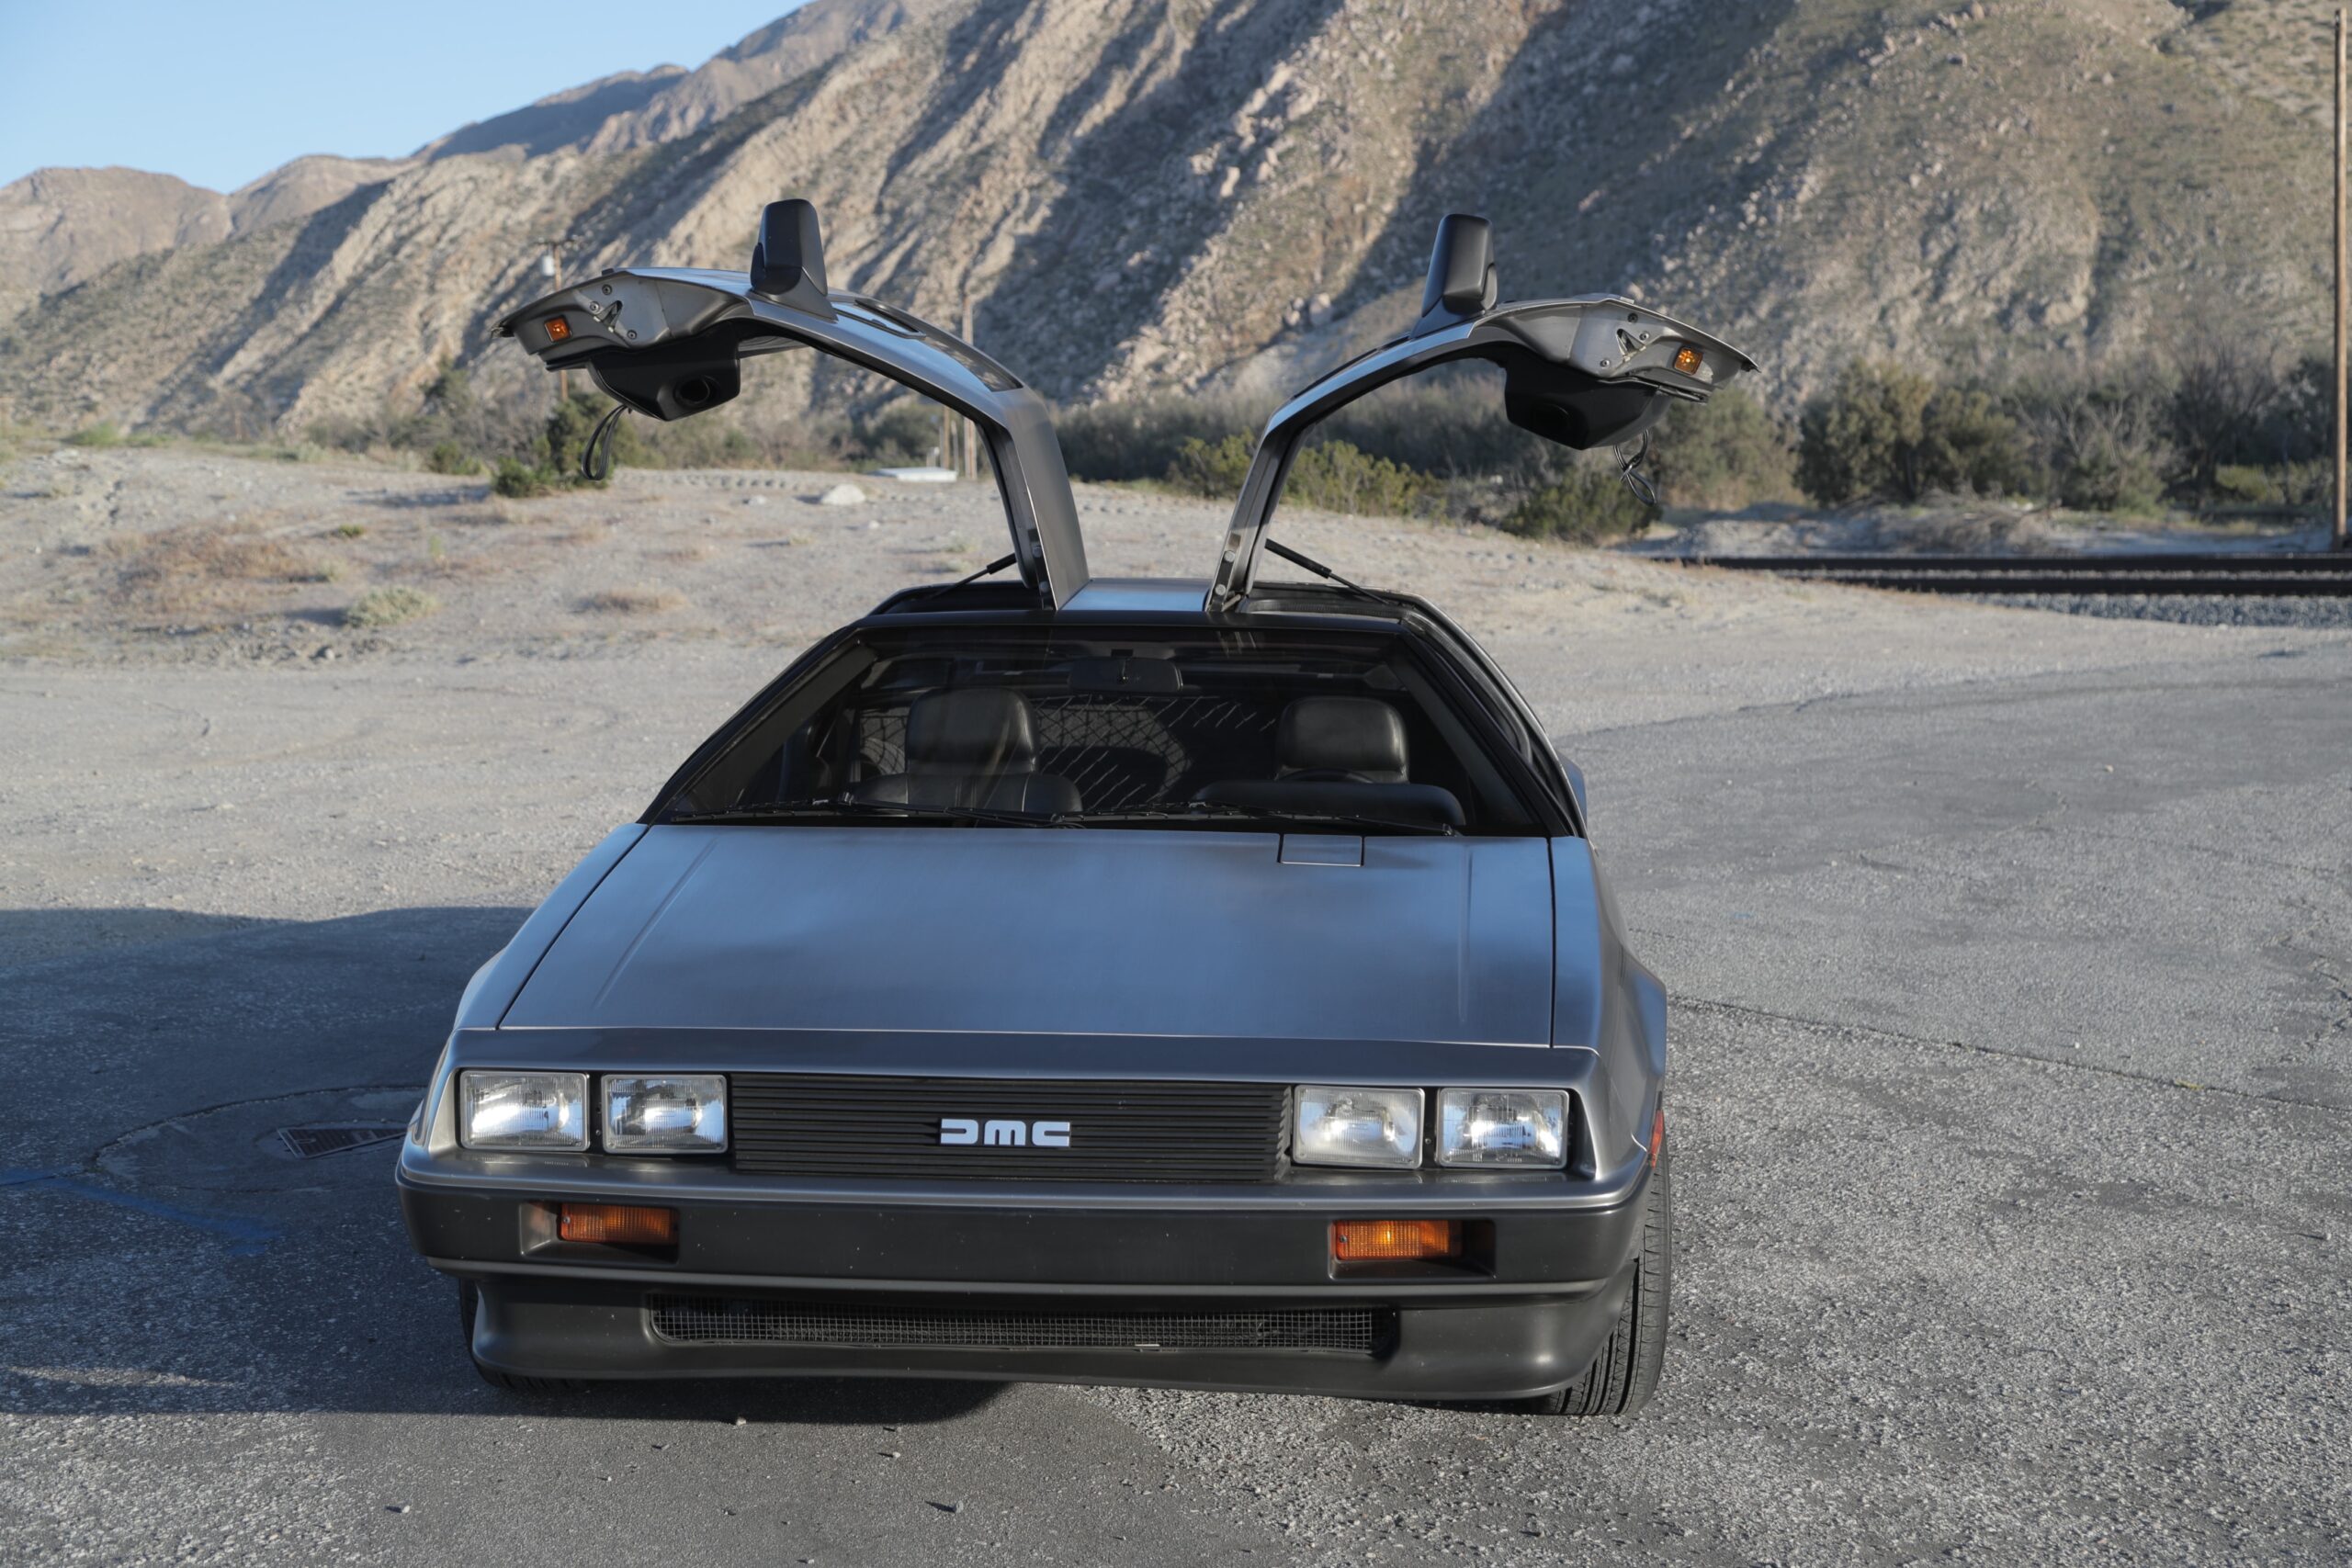 Delorean with wing doors up